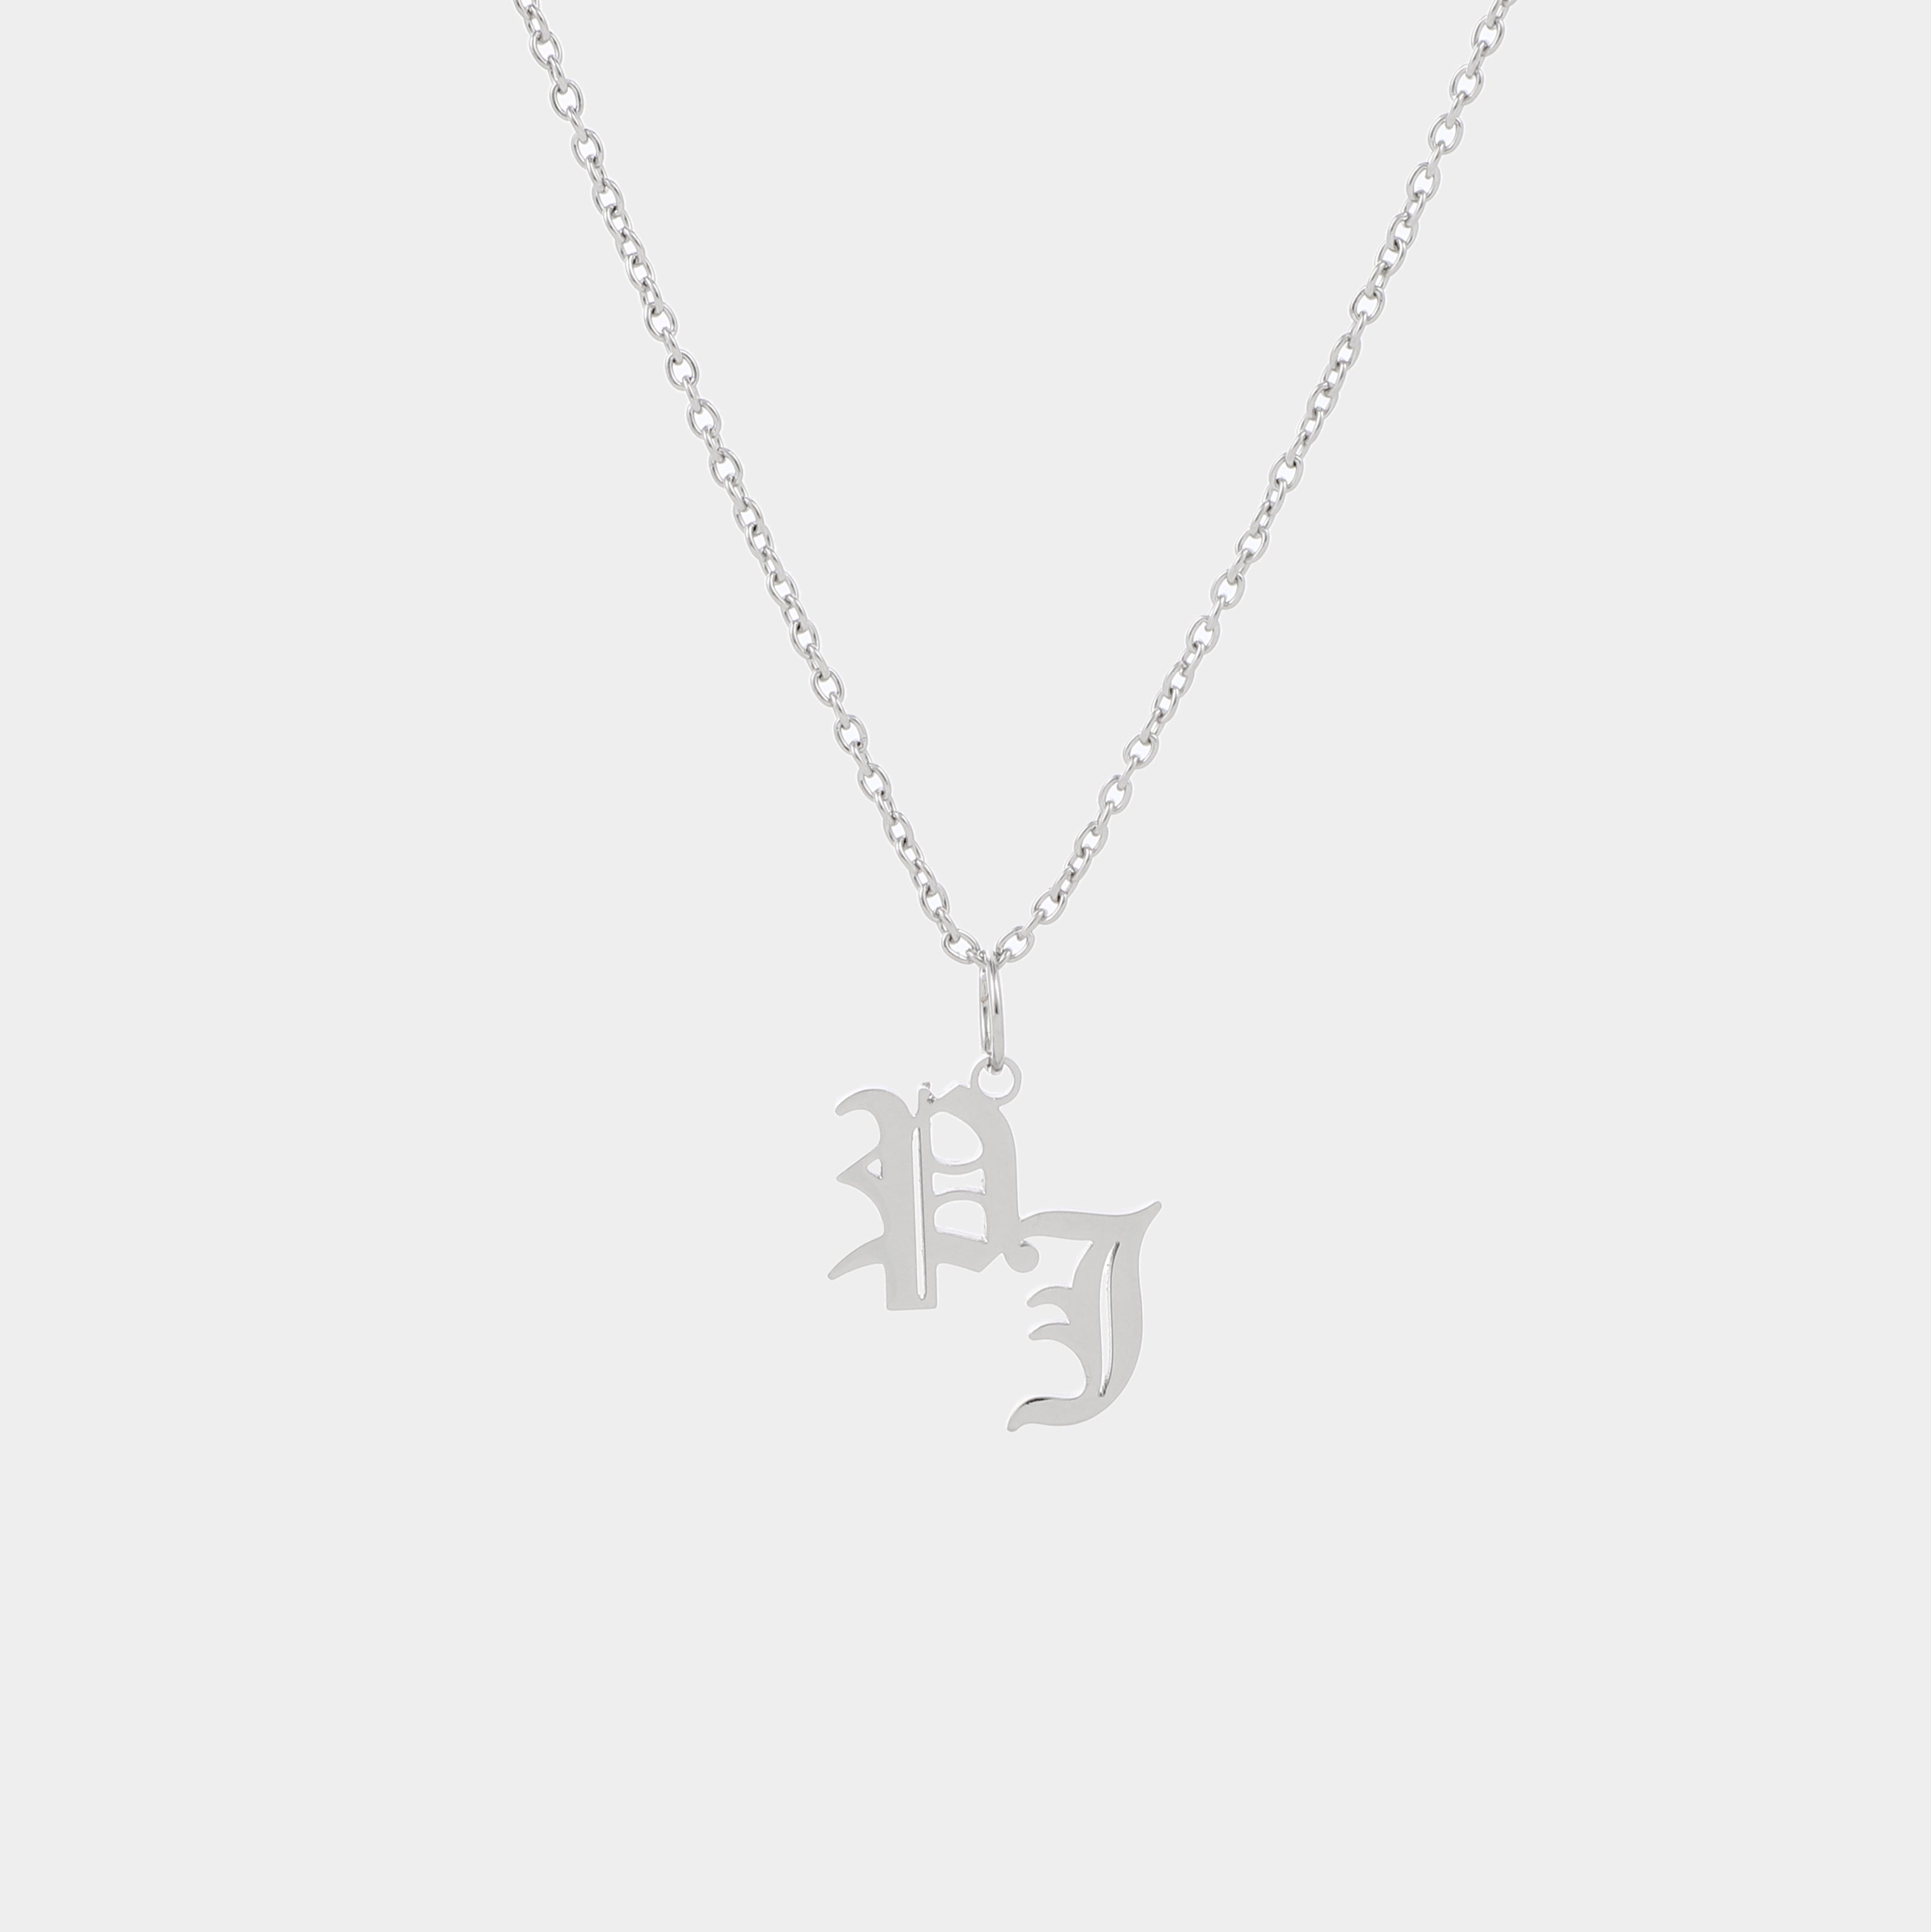 PERSONALIZE INITIAL NECKLACE